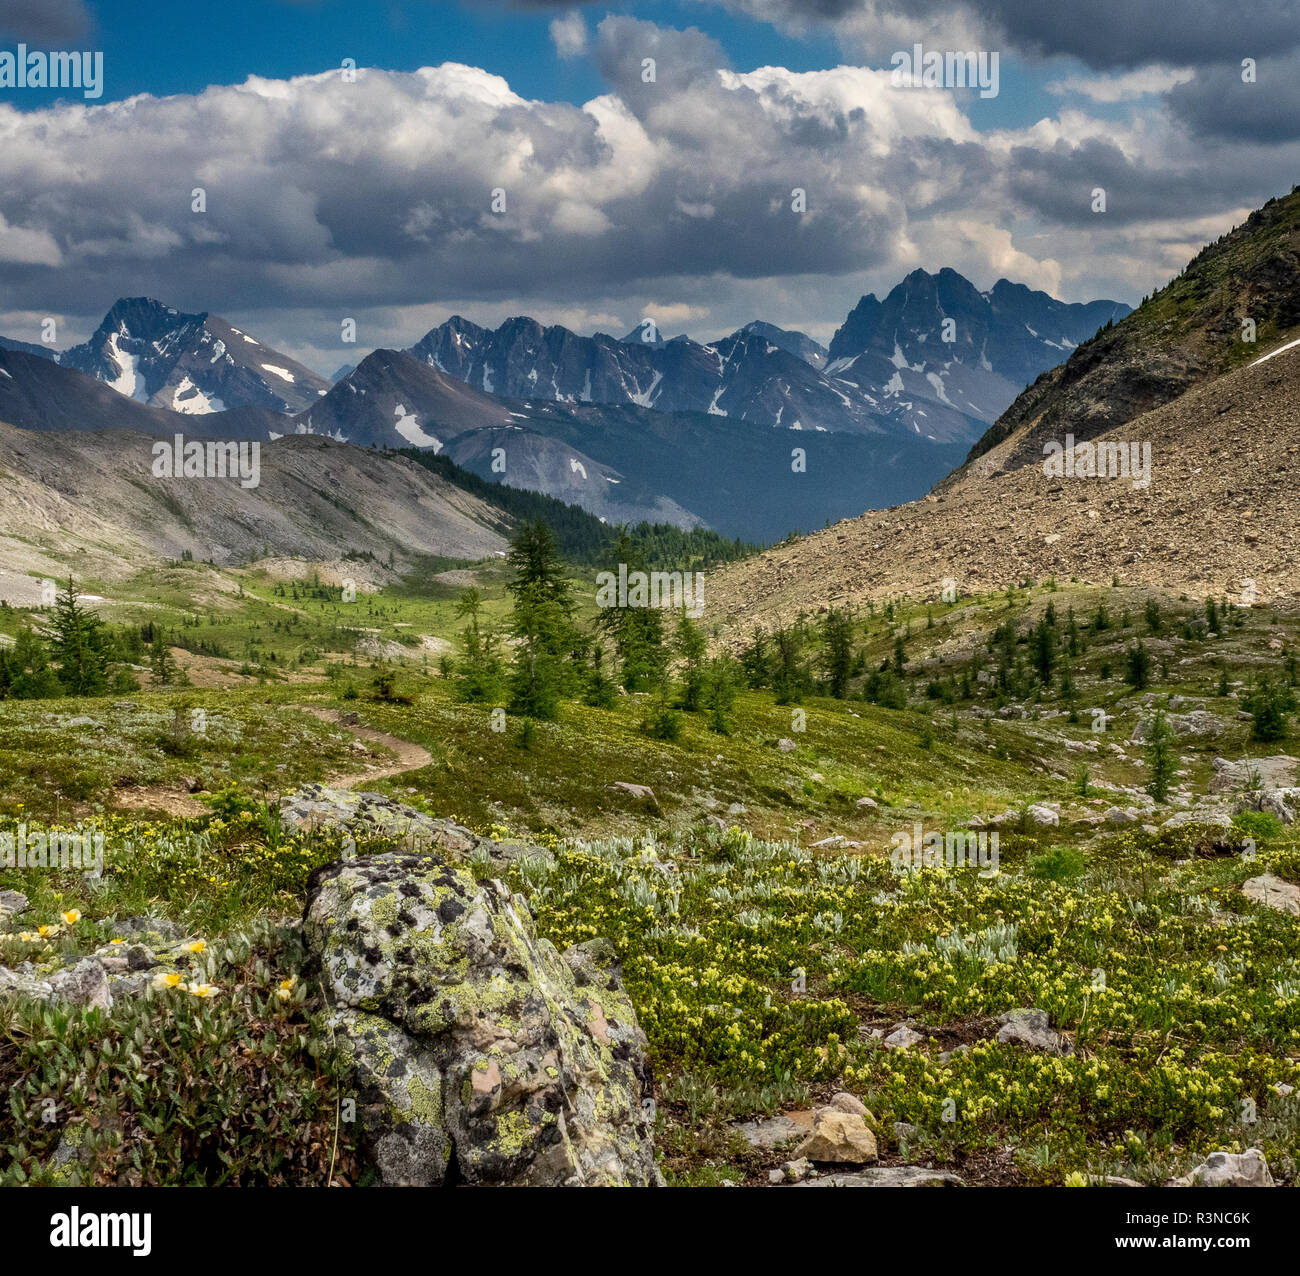 Valley View of Banff National Park from Mount Assiniboine, Provincial Park Stock Photo